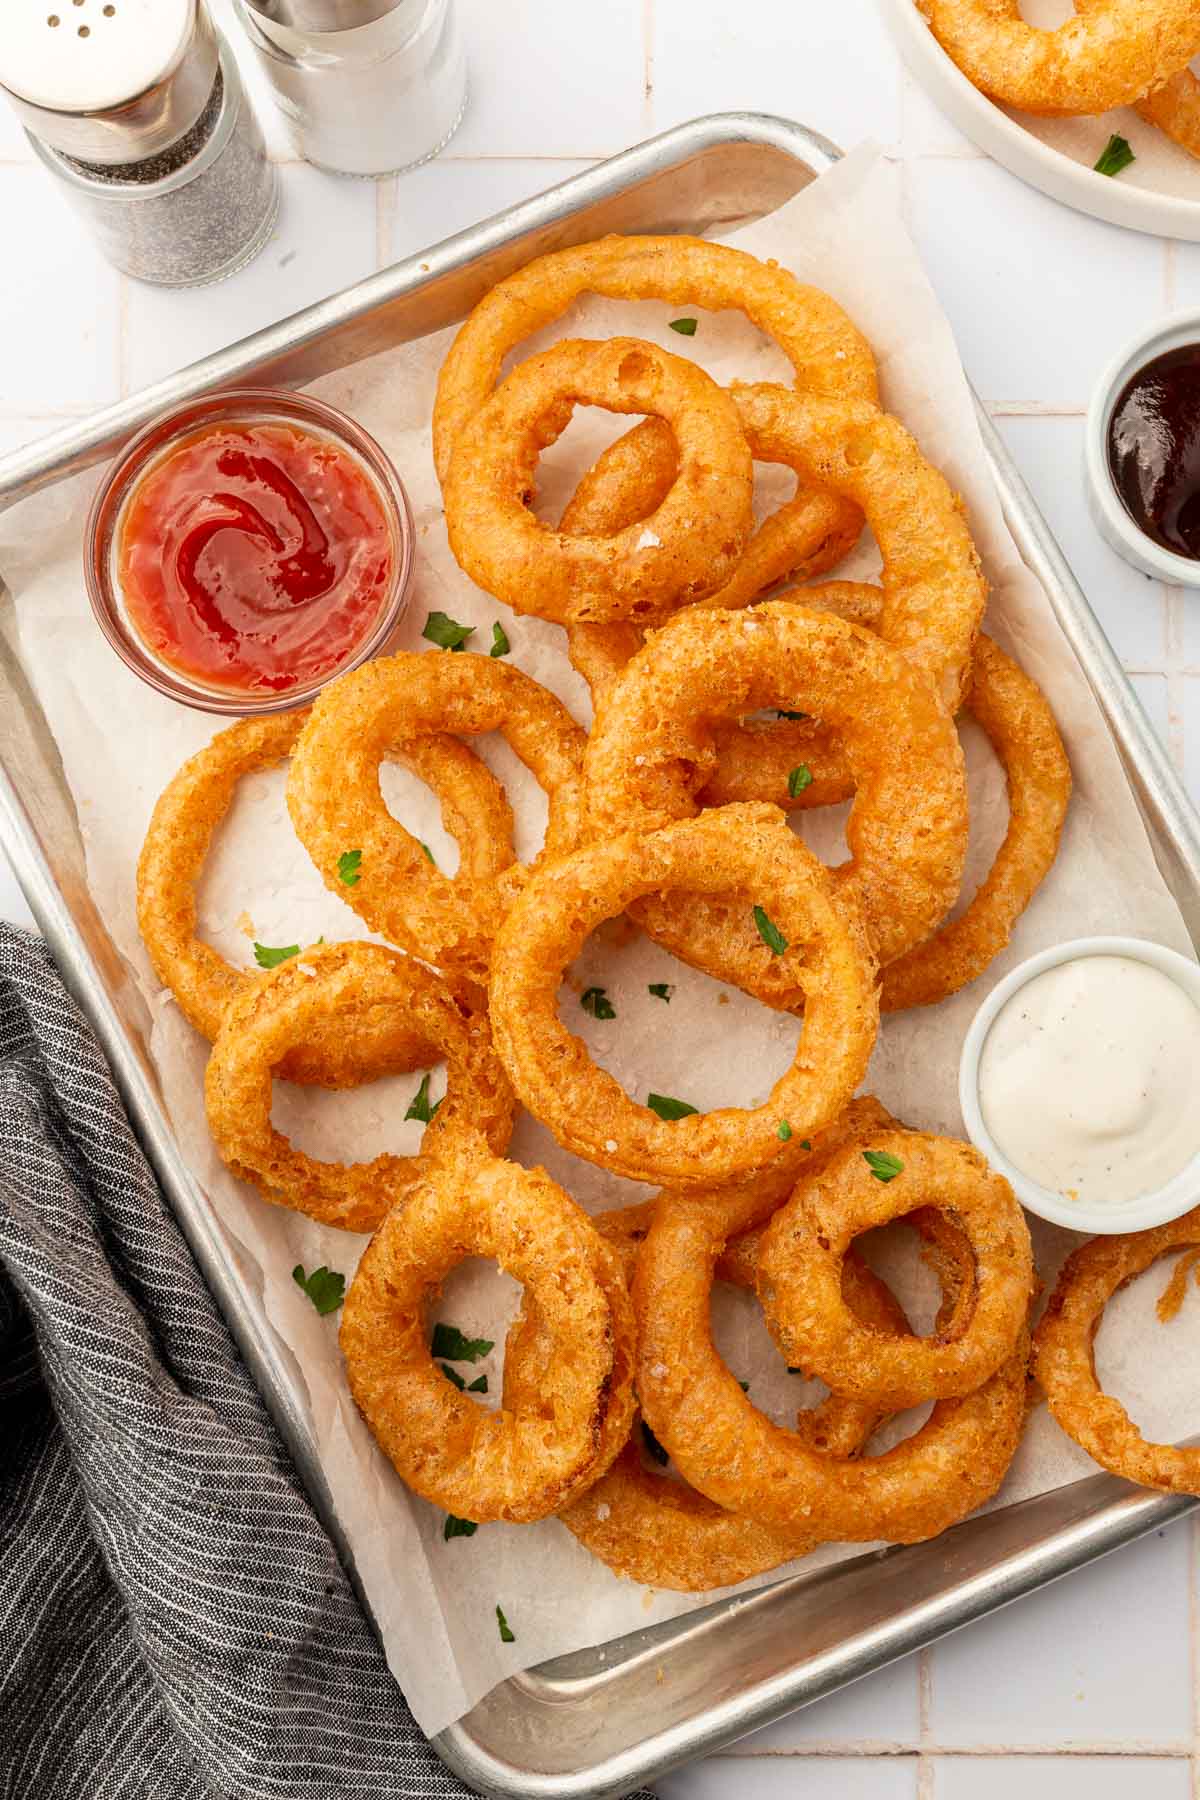 Gluten-free onion rings on a parchment lined baking sheet with a ramekin of ranch and a ramekin of ketchup.